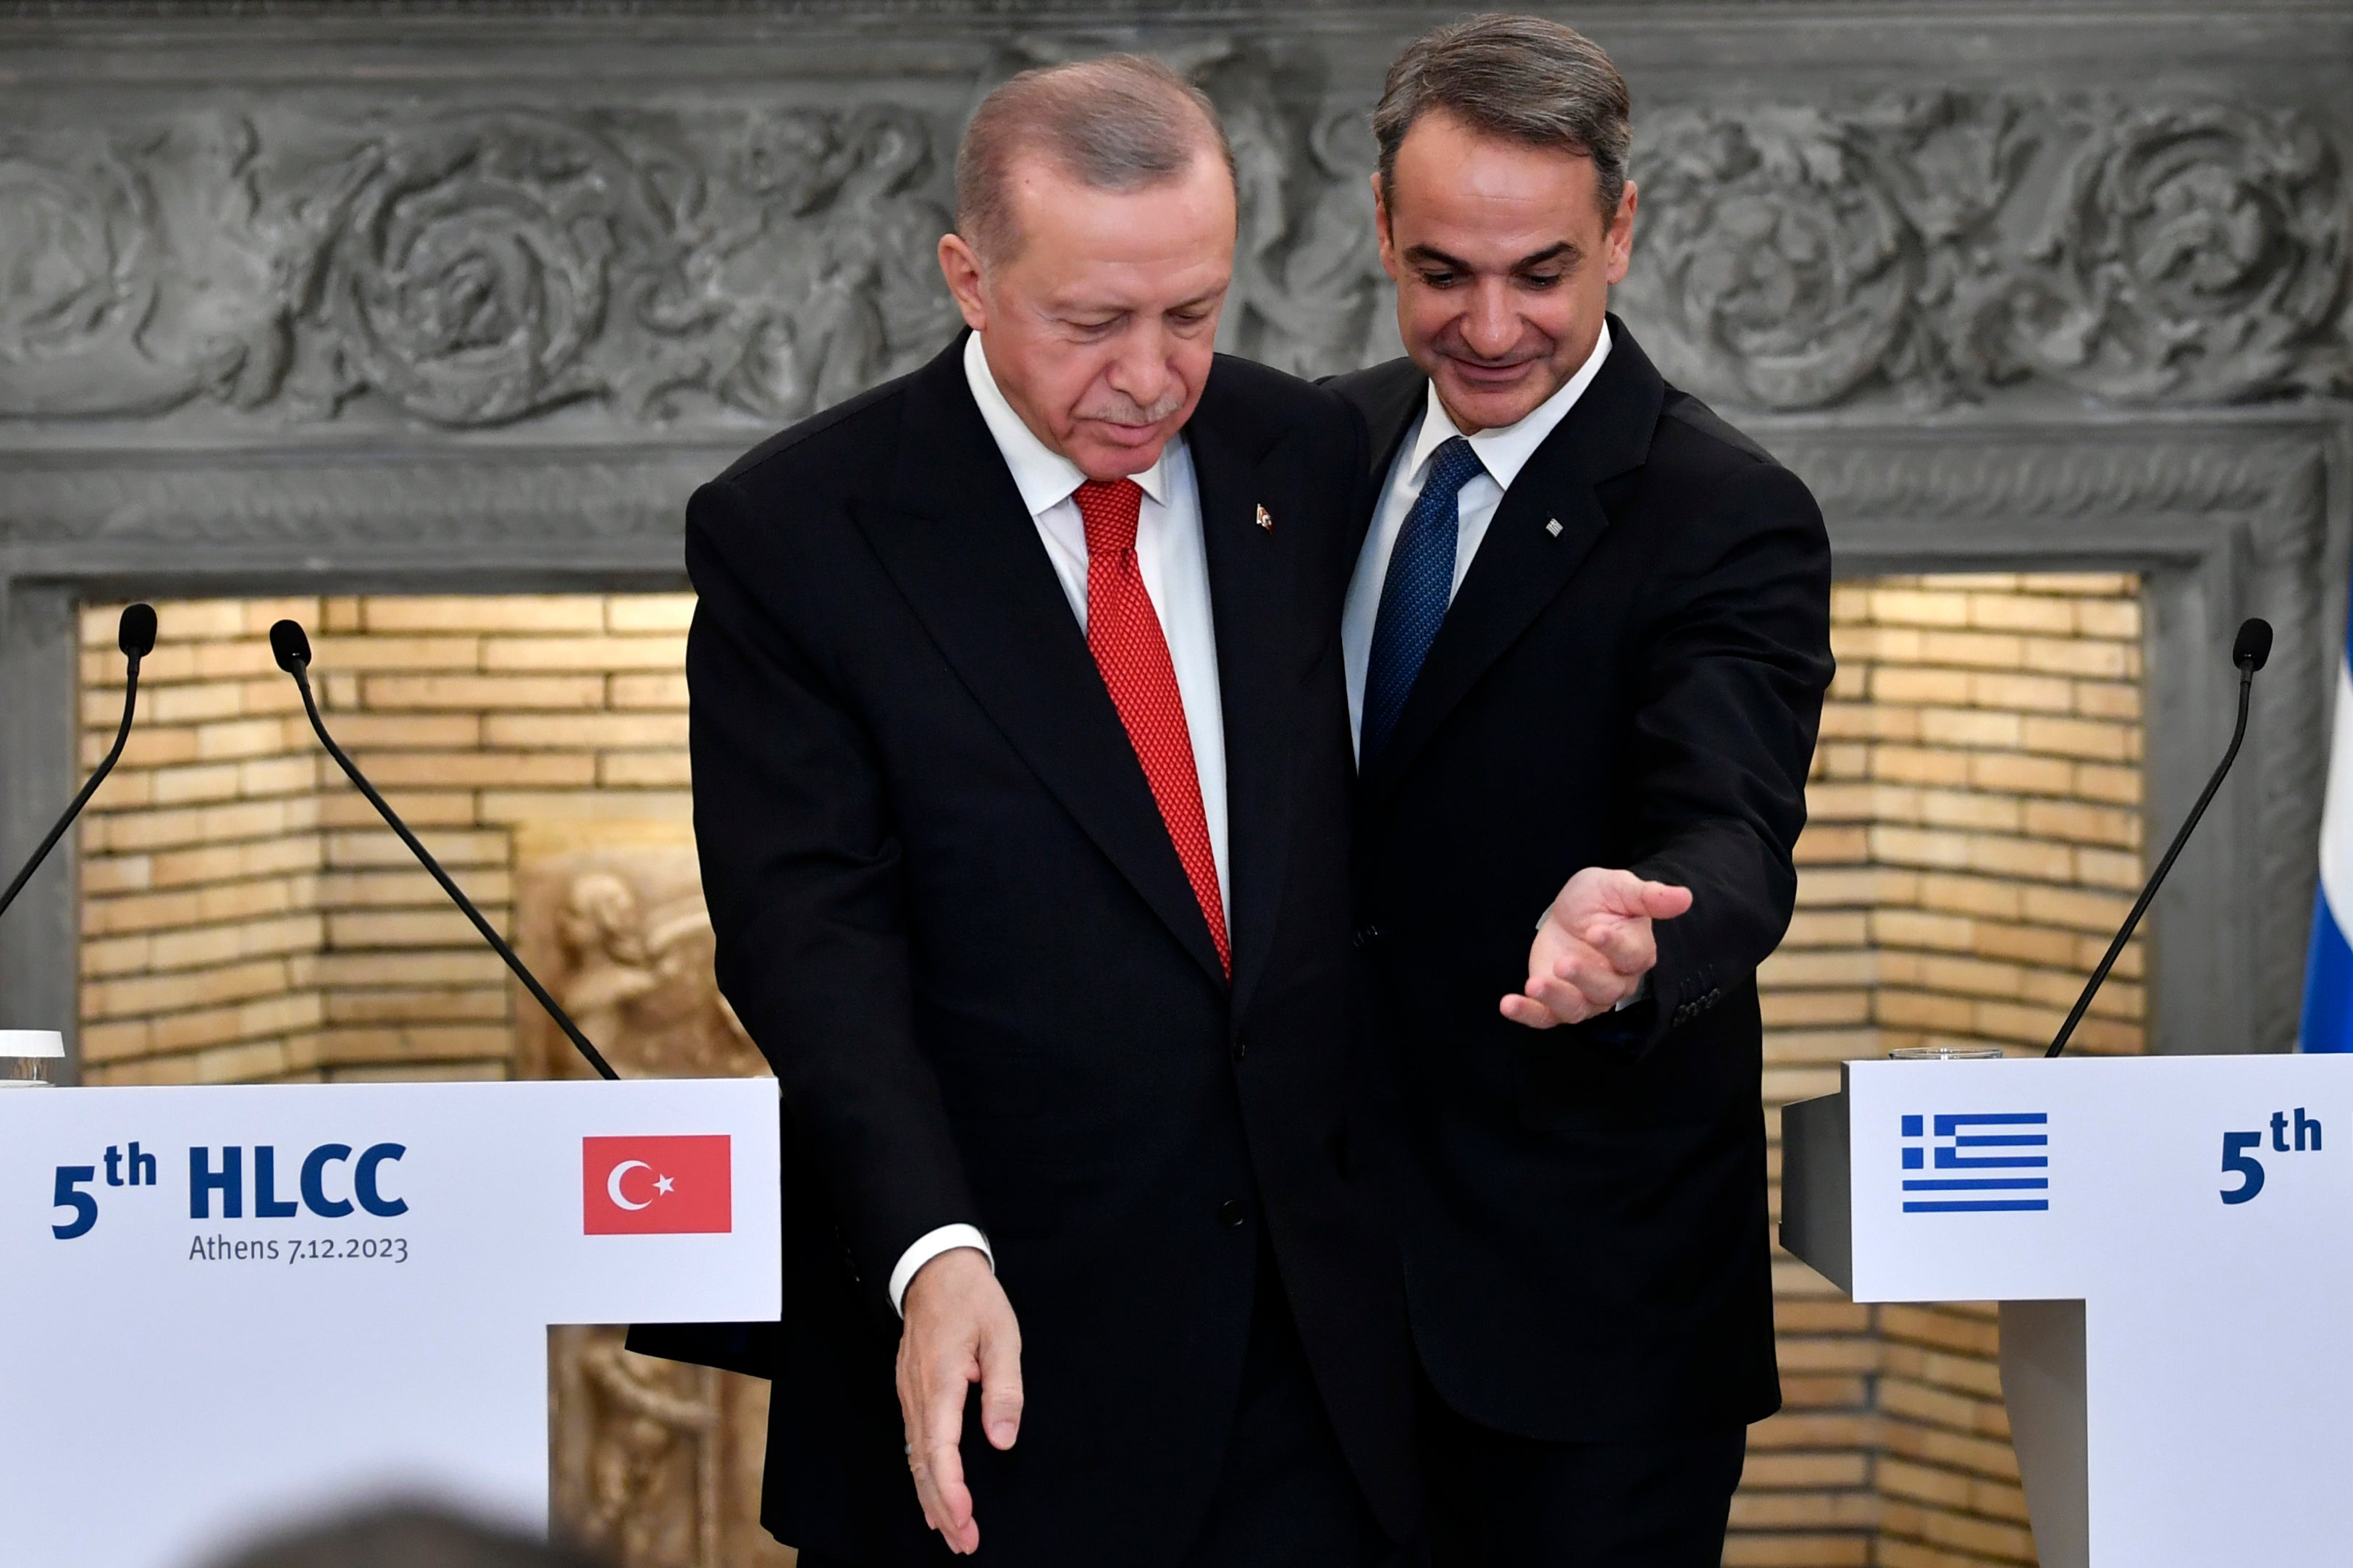 In this December 7, 2023, file photo, Greece's Prime Minister Kyriakos Mitsotakis, right, and Turkey's President Recep Tayyip Erdogan leave after their statements at Maximos Mansion in Athens